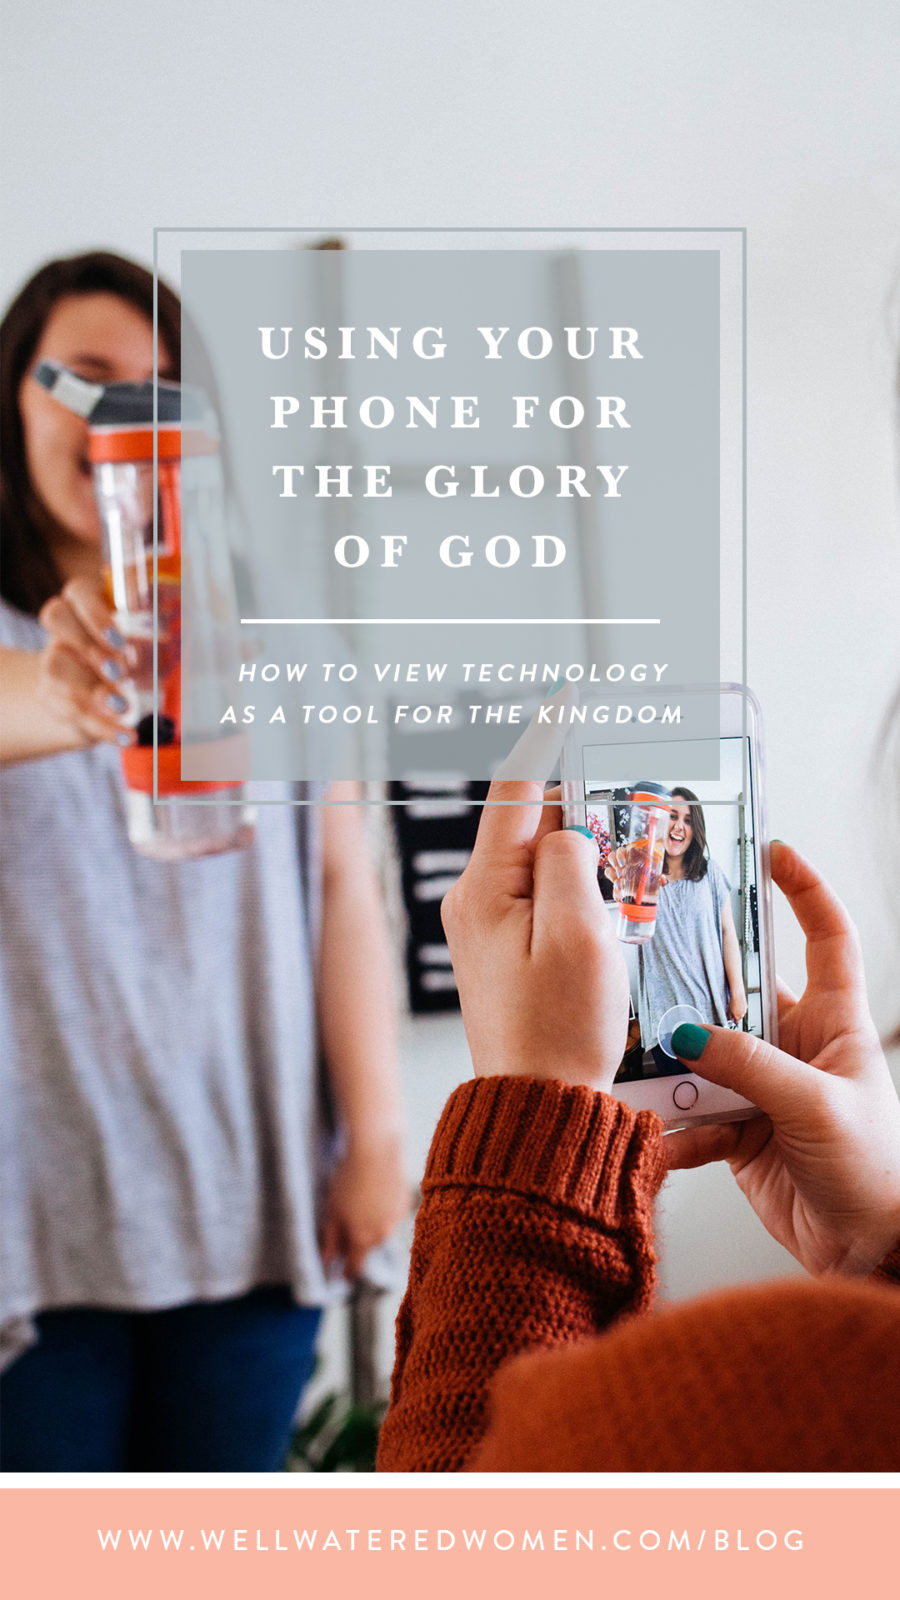 How to use your iPhone for the glory of God - 20 Apps to Fuel Your Faith Life (Christian App Suggestions) Free Guide!